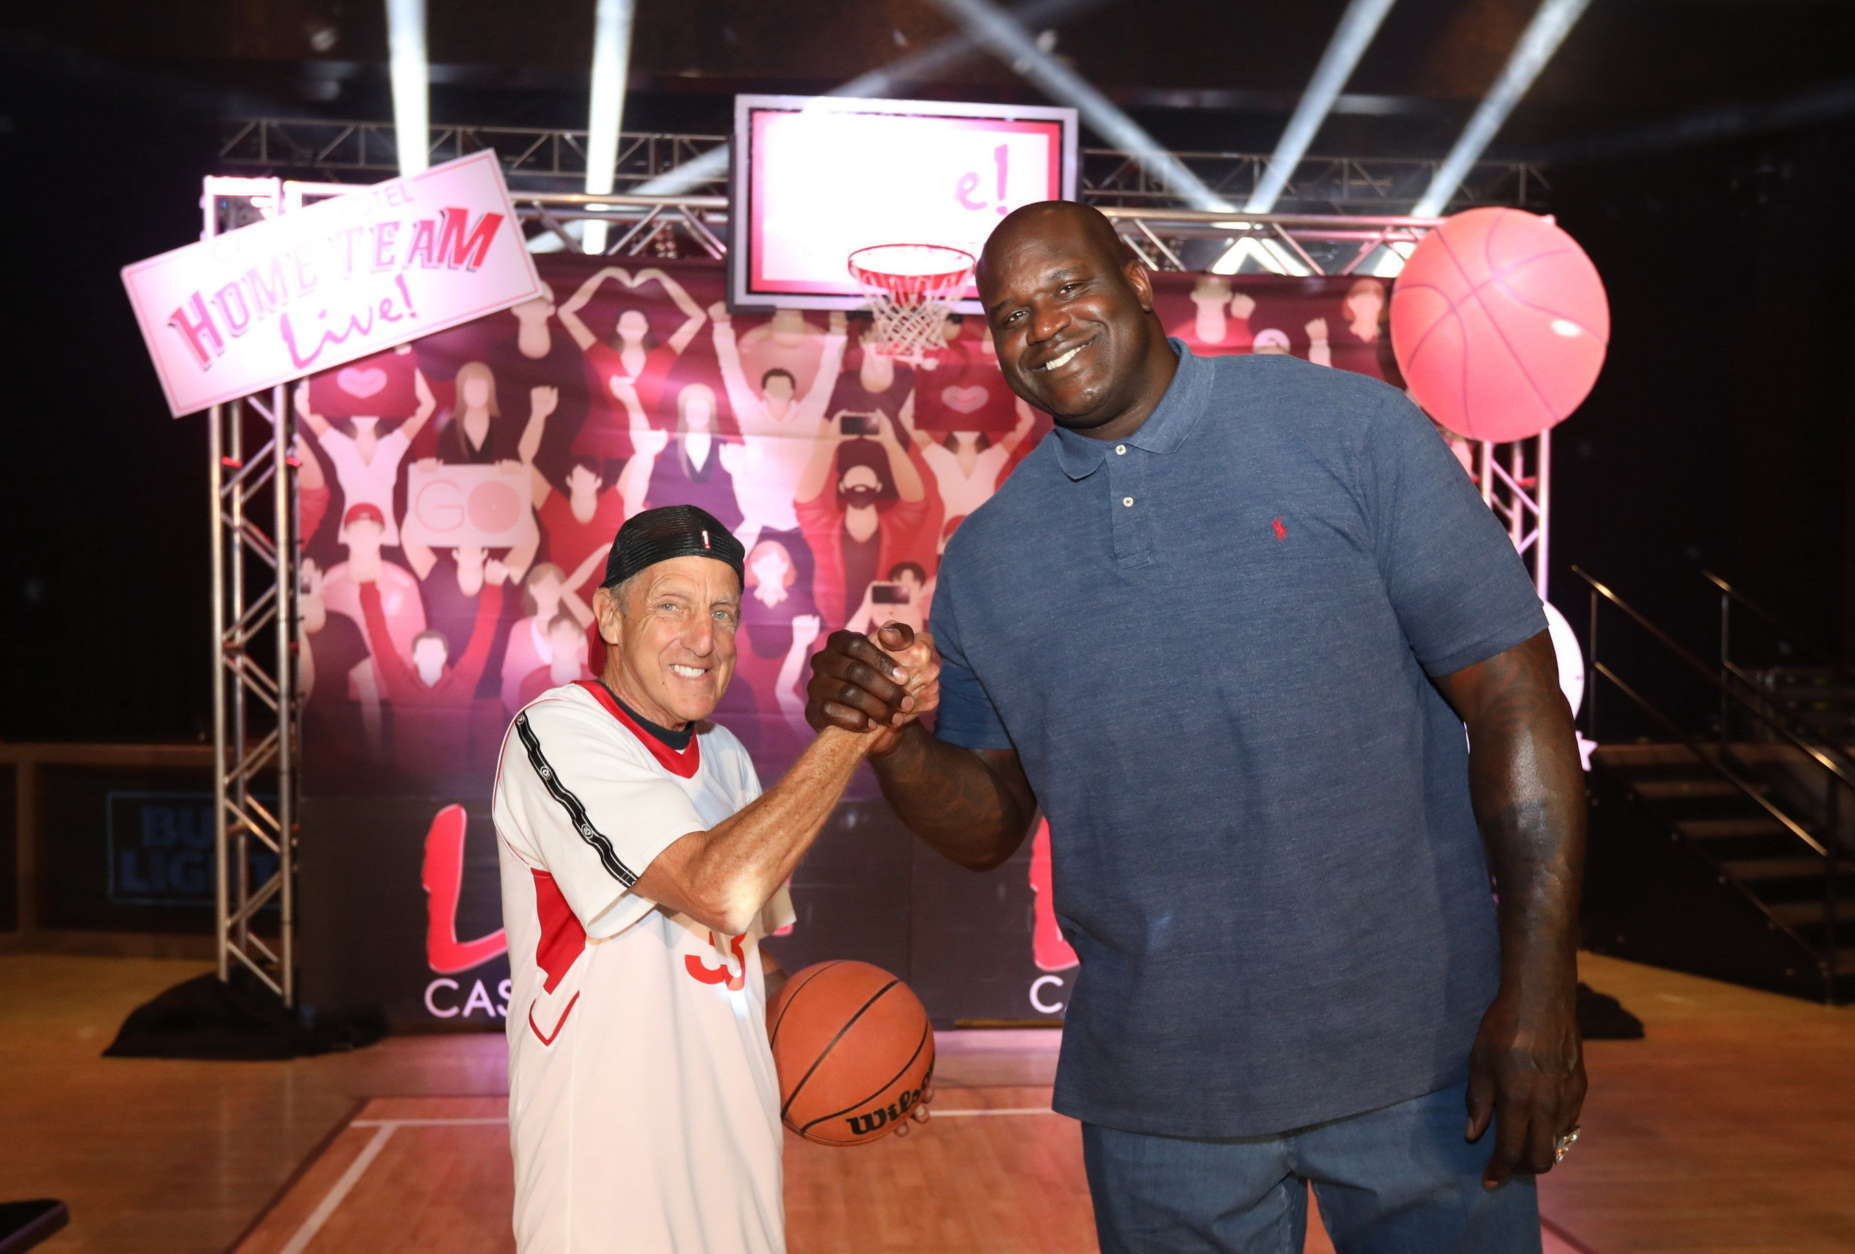 In a real-life David vs Goliath battle at Live! Casino &amp; Hotel, NBA Hall of Famer and 4-time NBA Champion Shaquille ONeal took on David Cordish, Chairman of The Cordish Companies, in a head to head free-throw competition. The Megastar vs Mogul fight ended in a tie, when both made their sudden death shots after draining three of six throws. (PRNewsfoto/Live! Casino and Hotel)